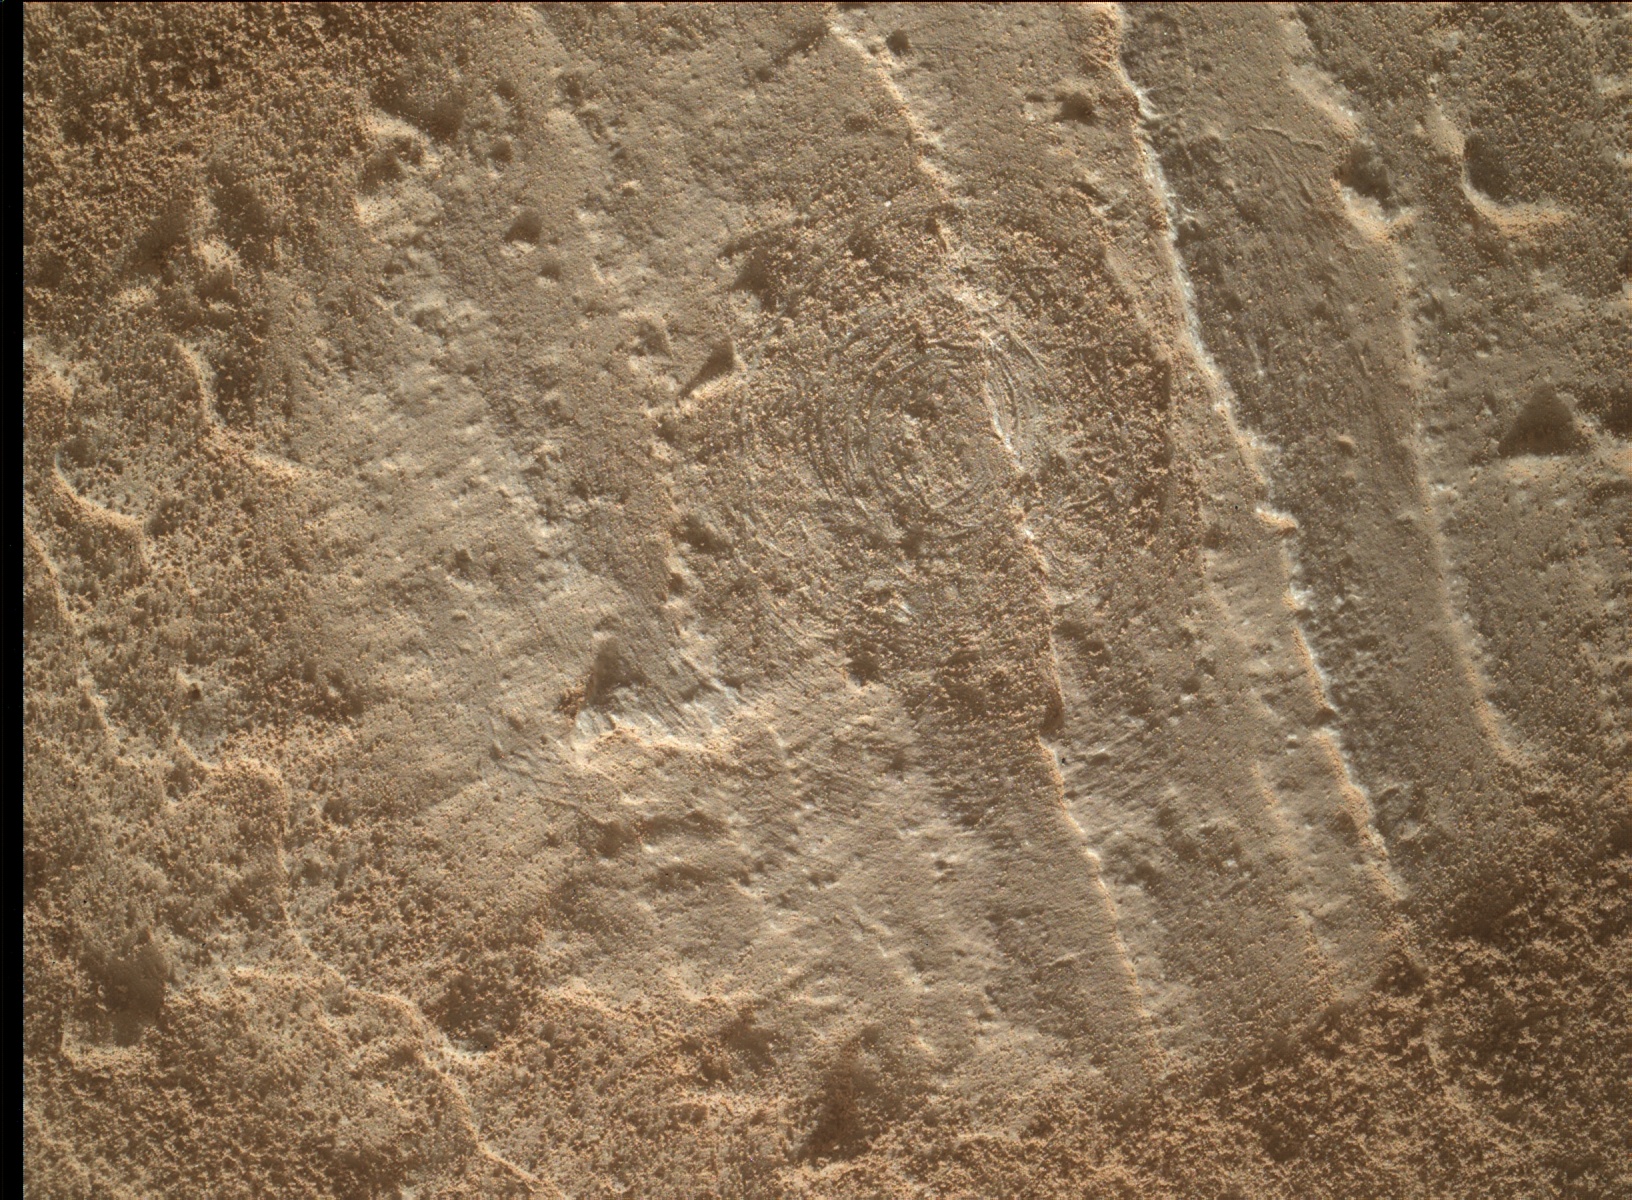 Nasa's Mars rover Curiosity acquired this image using its Mars Hand Lens Imager (MAHLI) on Sol 3889